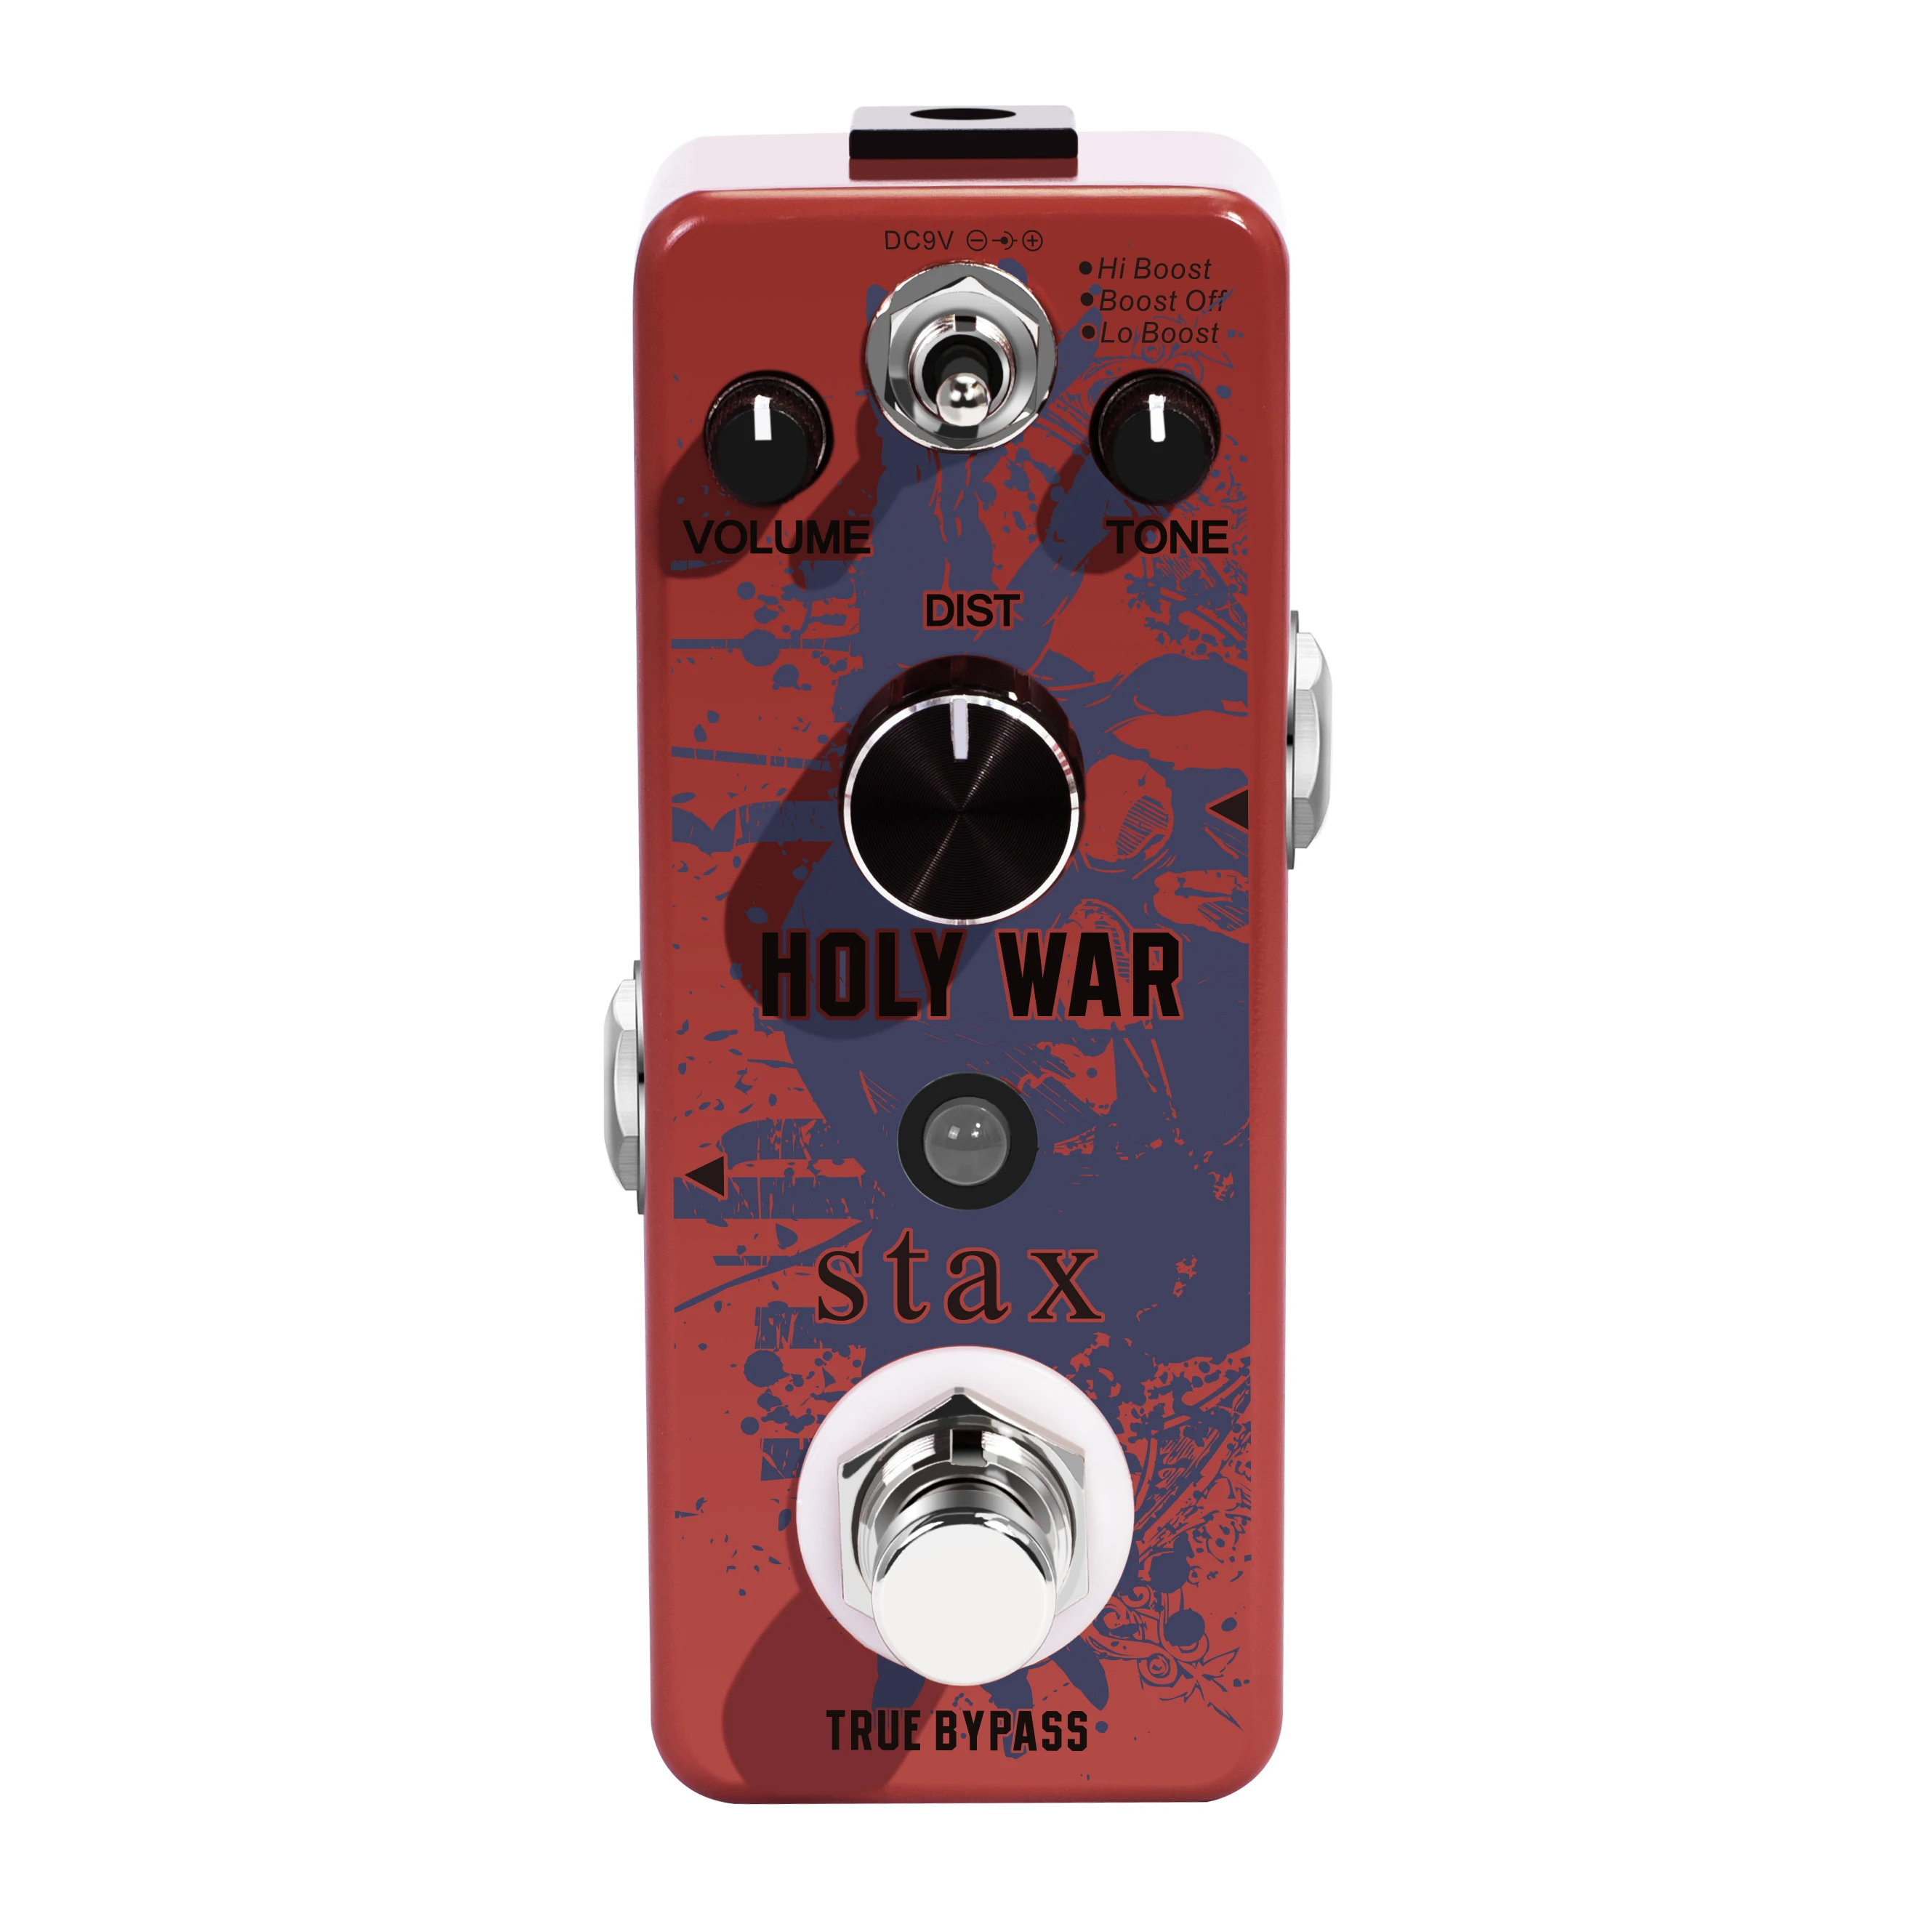 

Stax LEF-305 Guitar Holy Way Pedal Analog Heavy Metal Distortion Effect Pedals Sound Like Micro Metel Muff Classic 80's Effecto